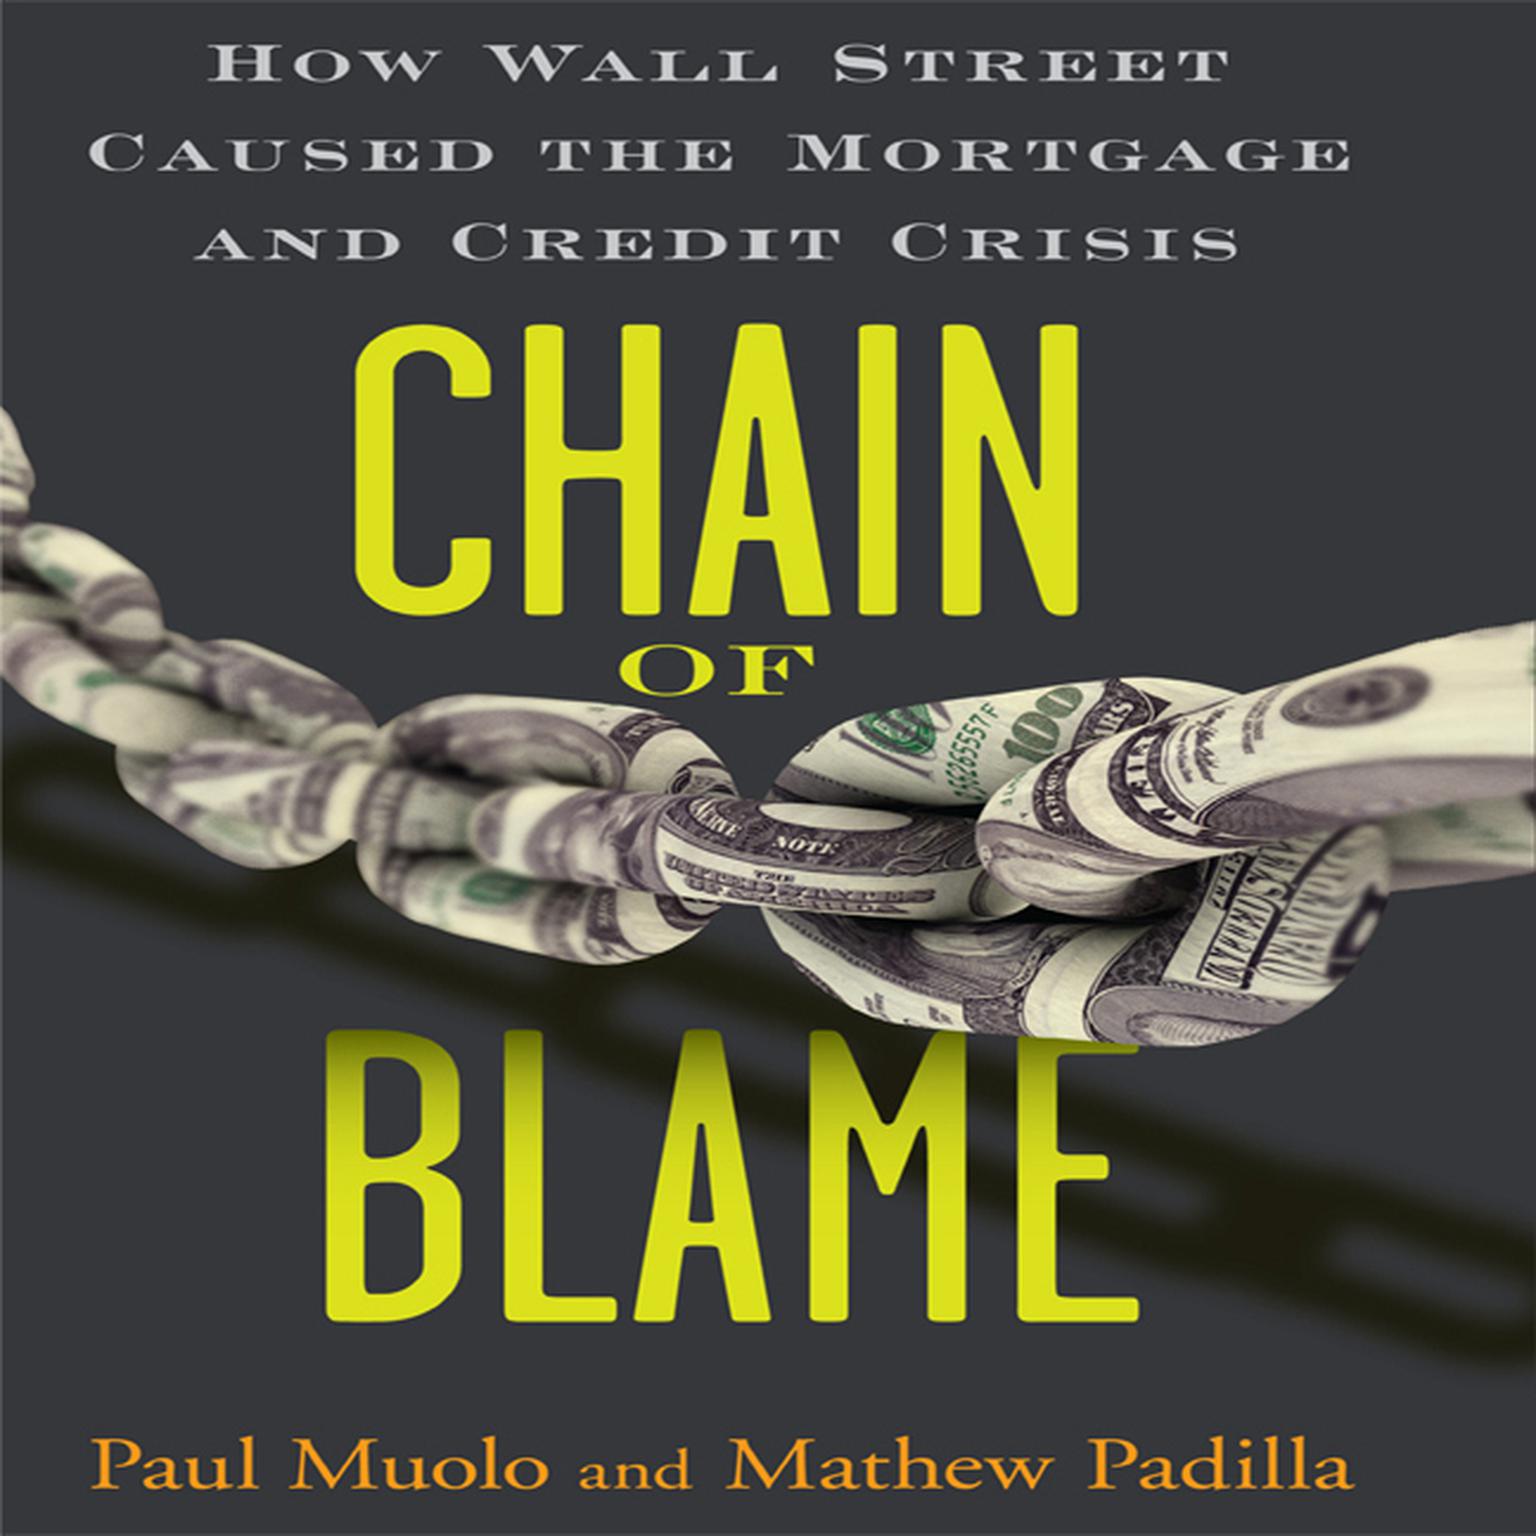 Chain Blame: How Wall Street Caused the Mortgage and Credit Crisis Audiobook, by Paul Muolo